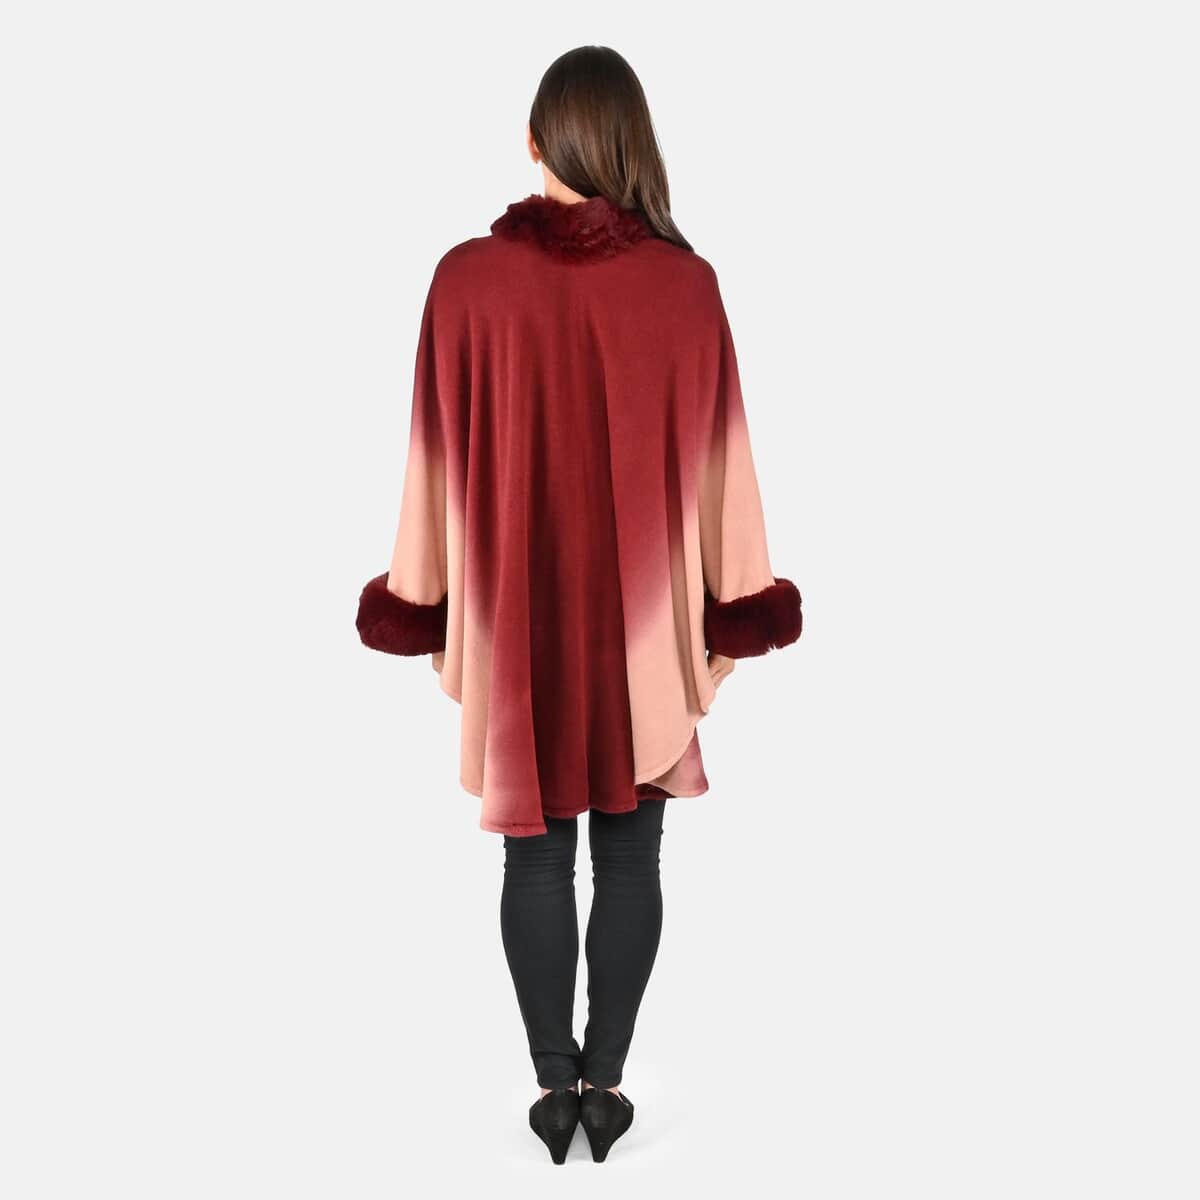 Tamsy Burgundy Ombre Cape with Faux Fur Trim - One Size Fits Most image number 1